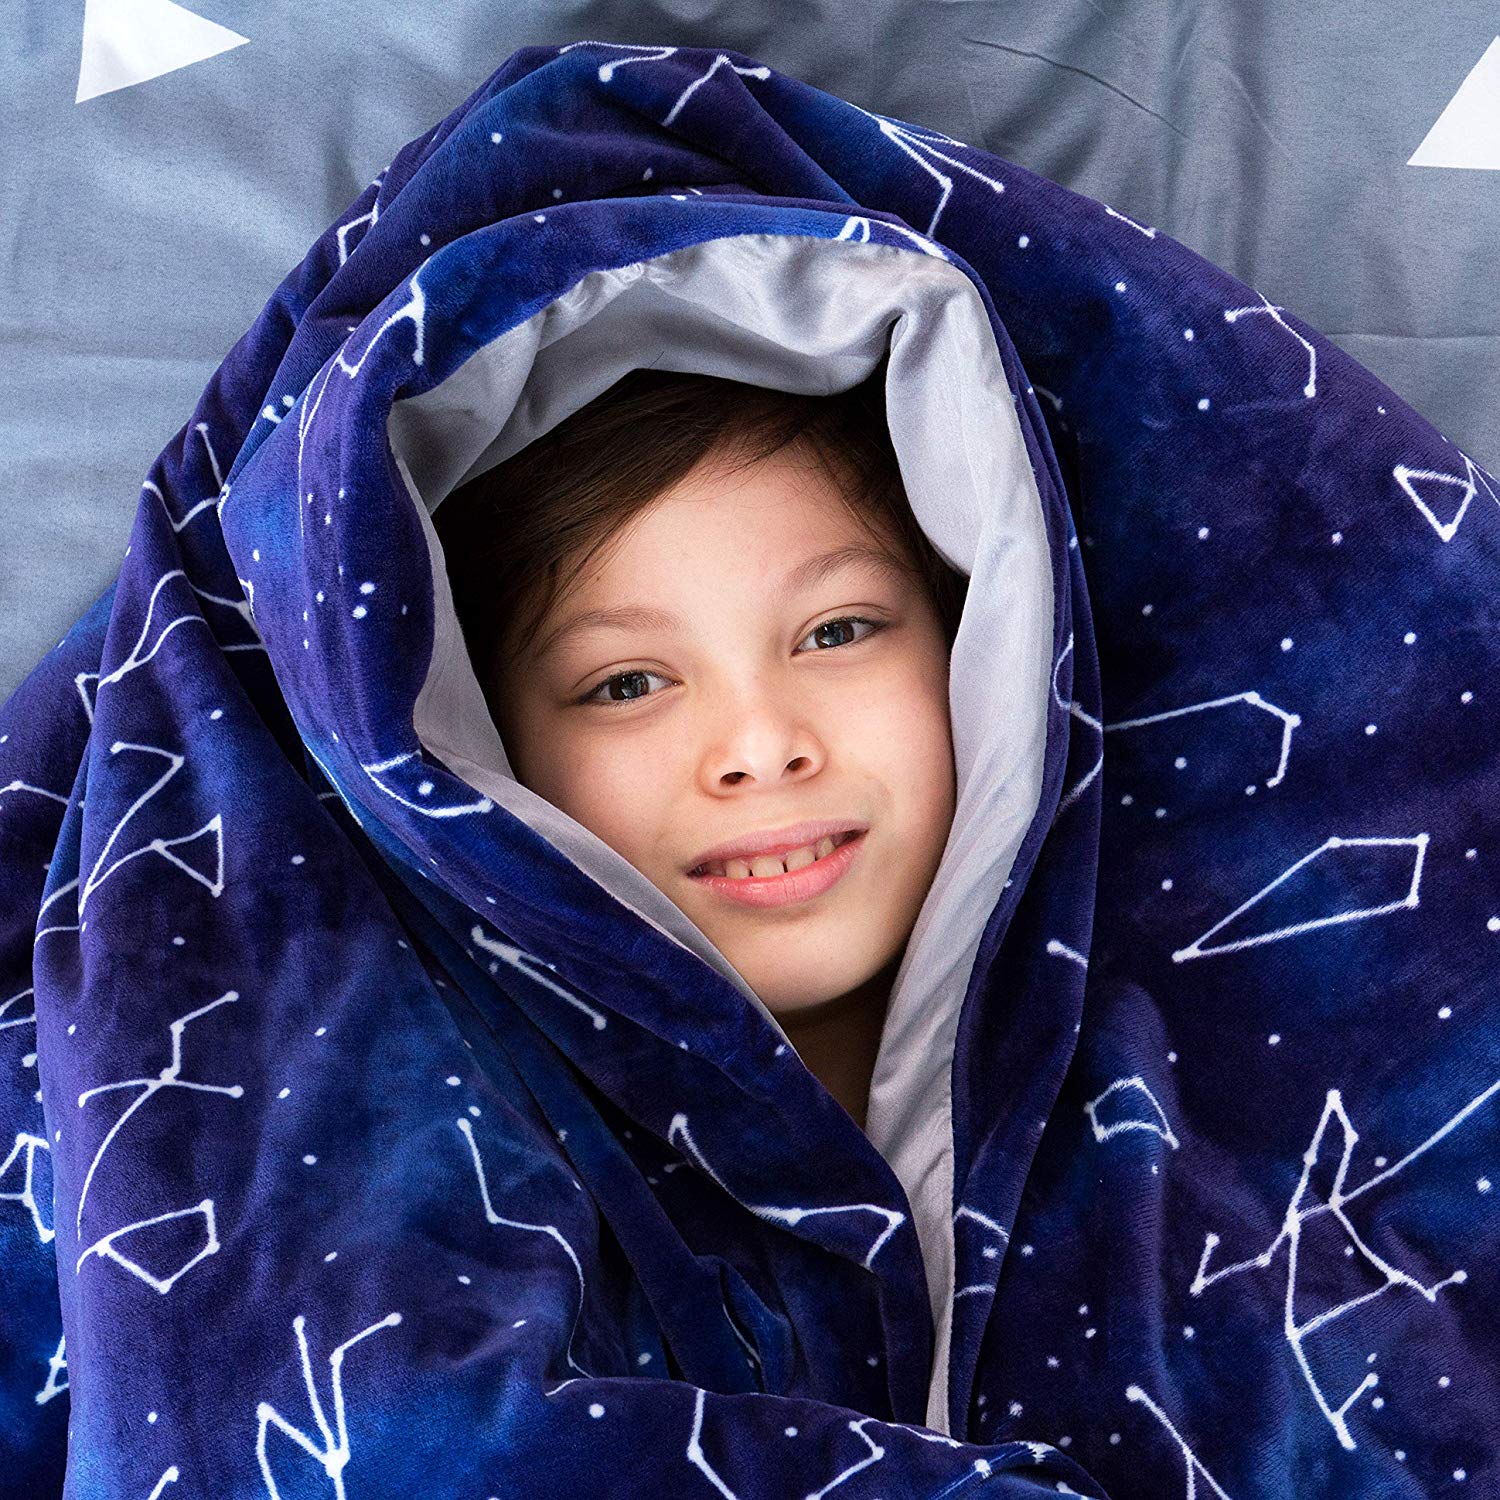 The 10 Best Weighted Blankets for Kids (Reviewed & Compared in 2022)